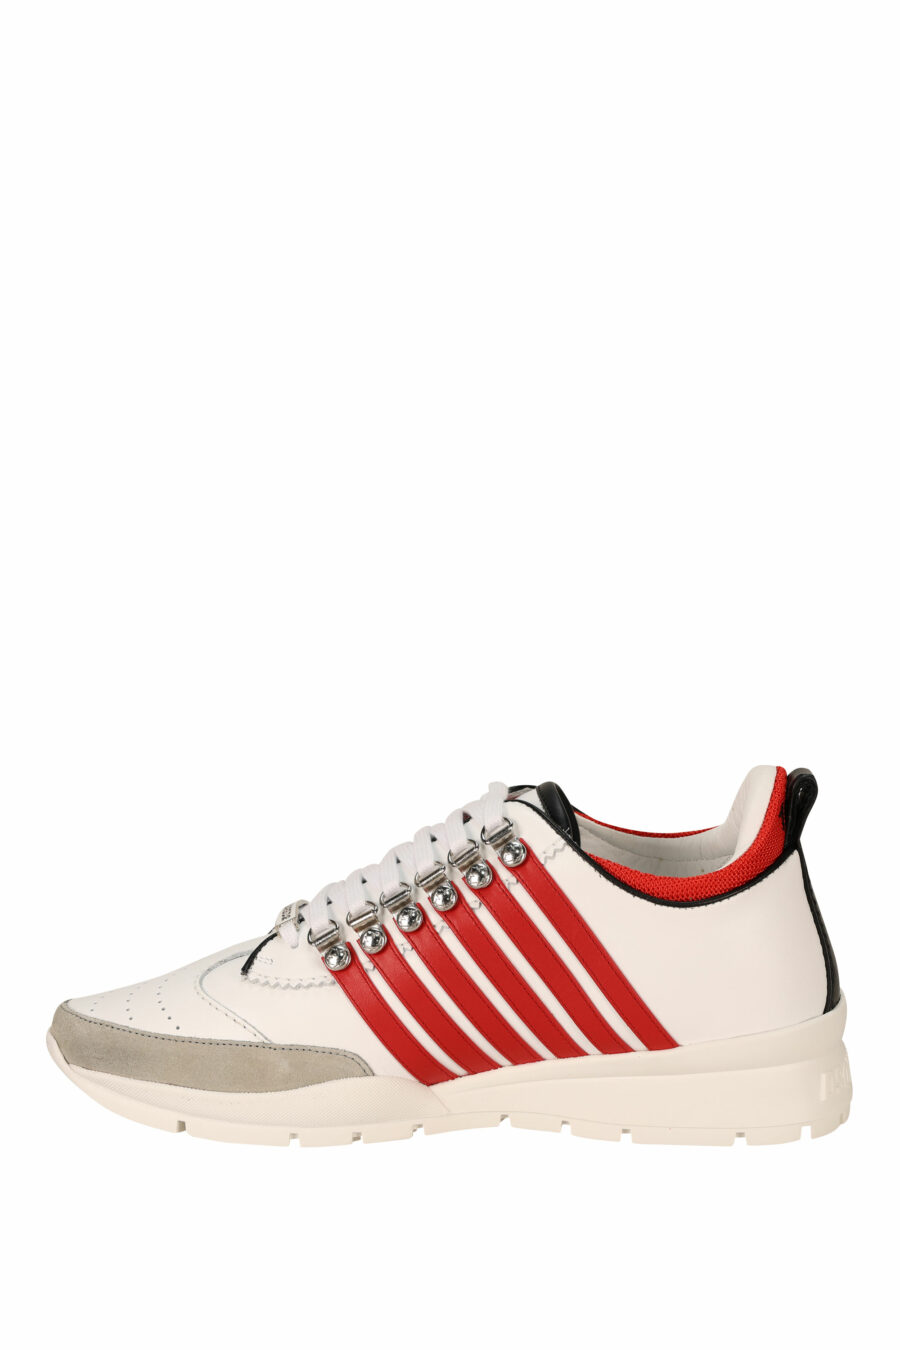 White trainers with red lines and white sole - 8055777300985 2